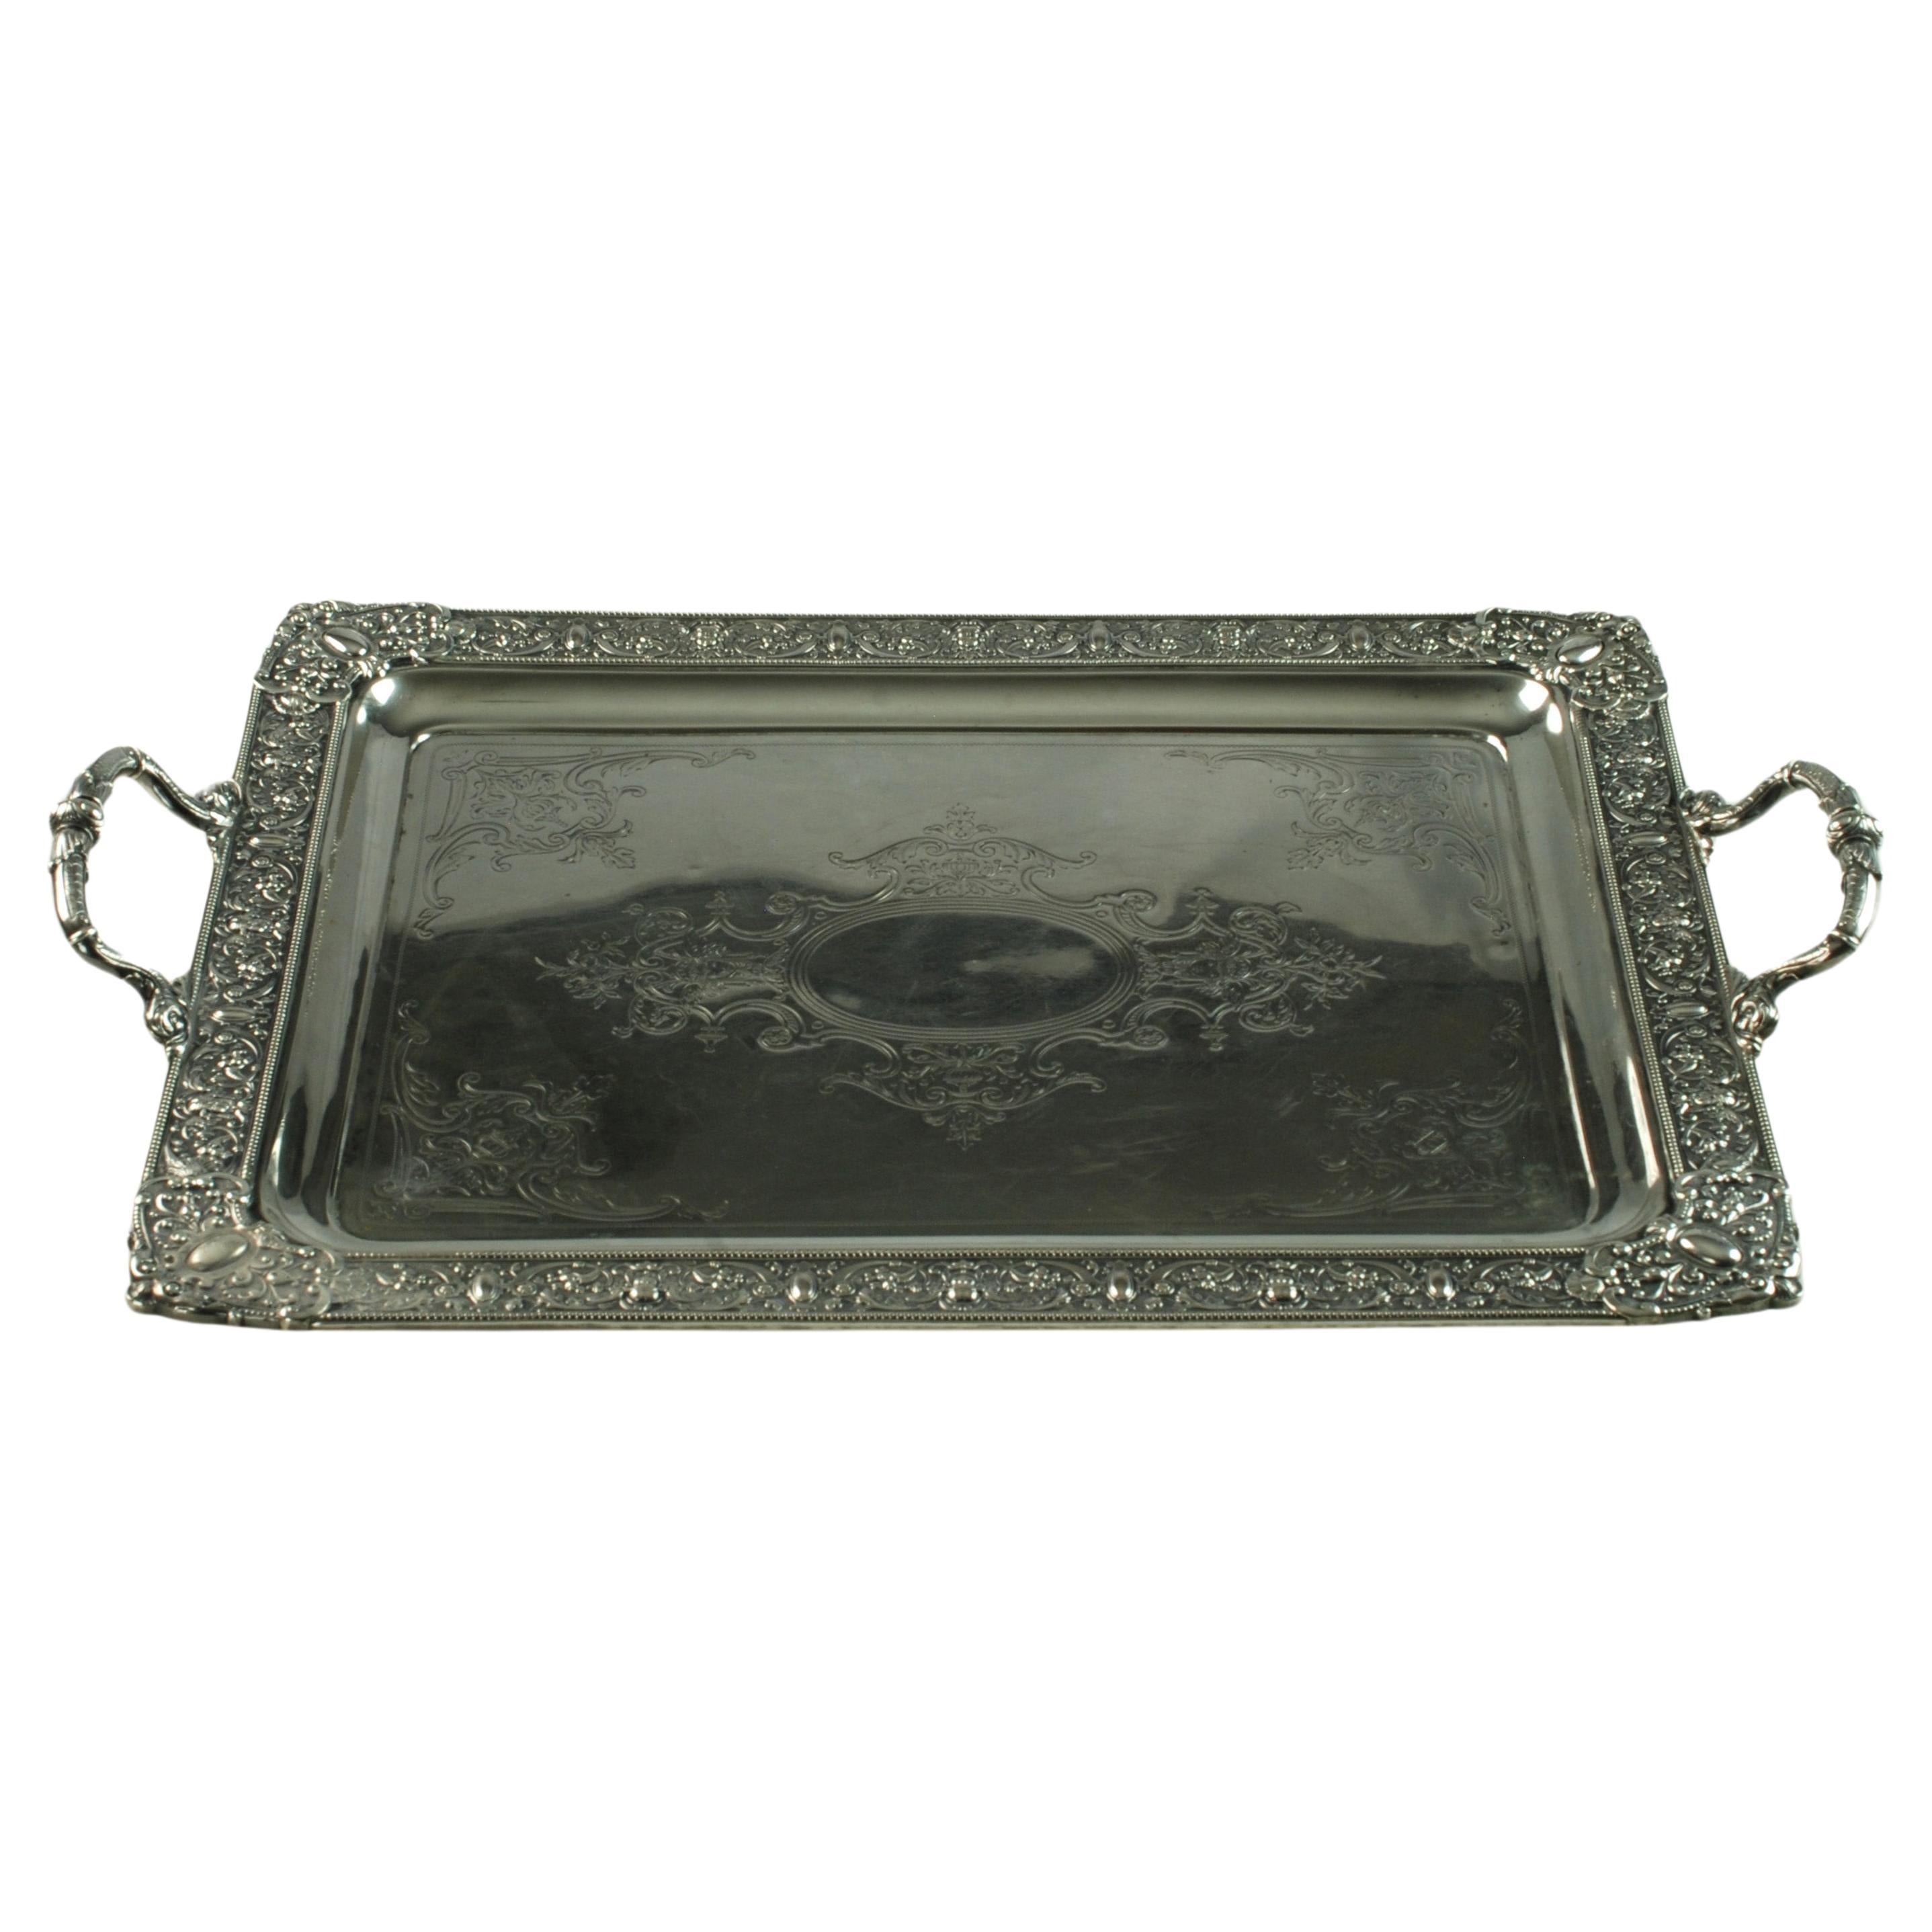 This elegant sterling silver rectangular double-handled butlers tray features engraved Neo-Renaissance decoration including winged cherubs along with urns and floral and foliate motifs.  There is a large oval cartouche at the center which has not